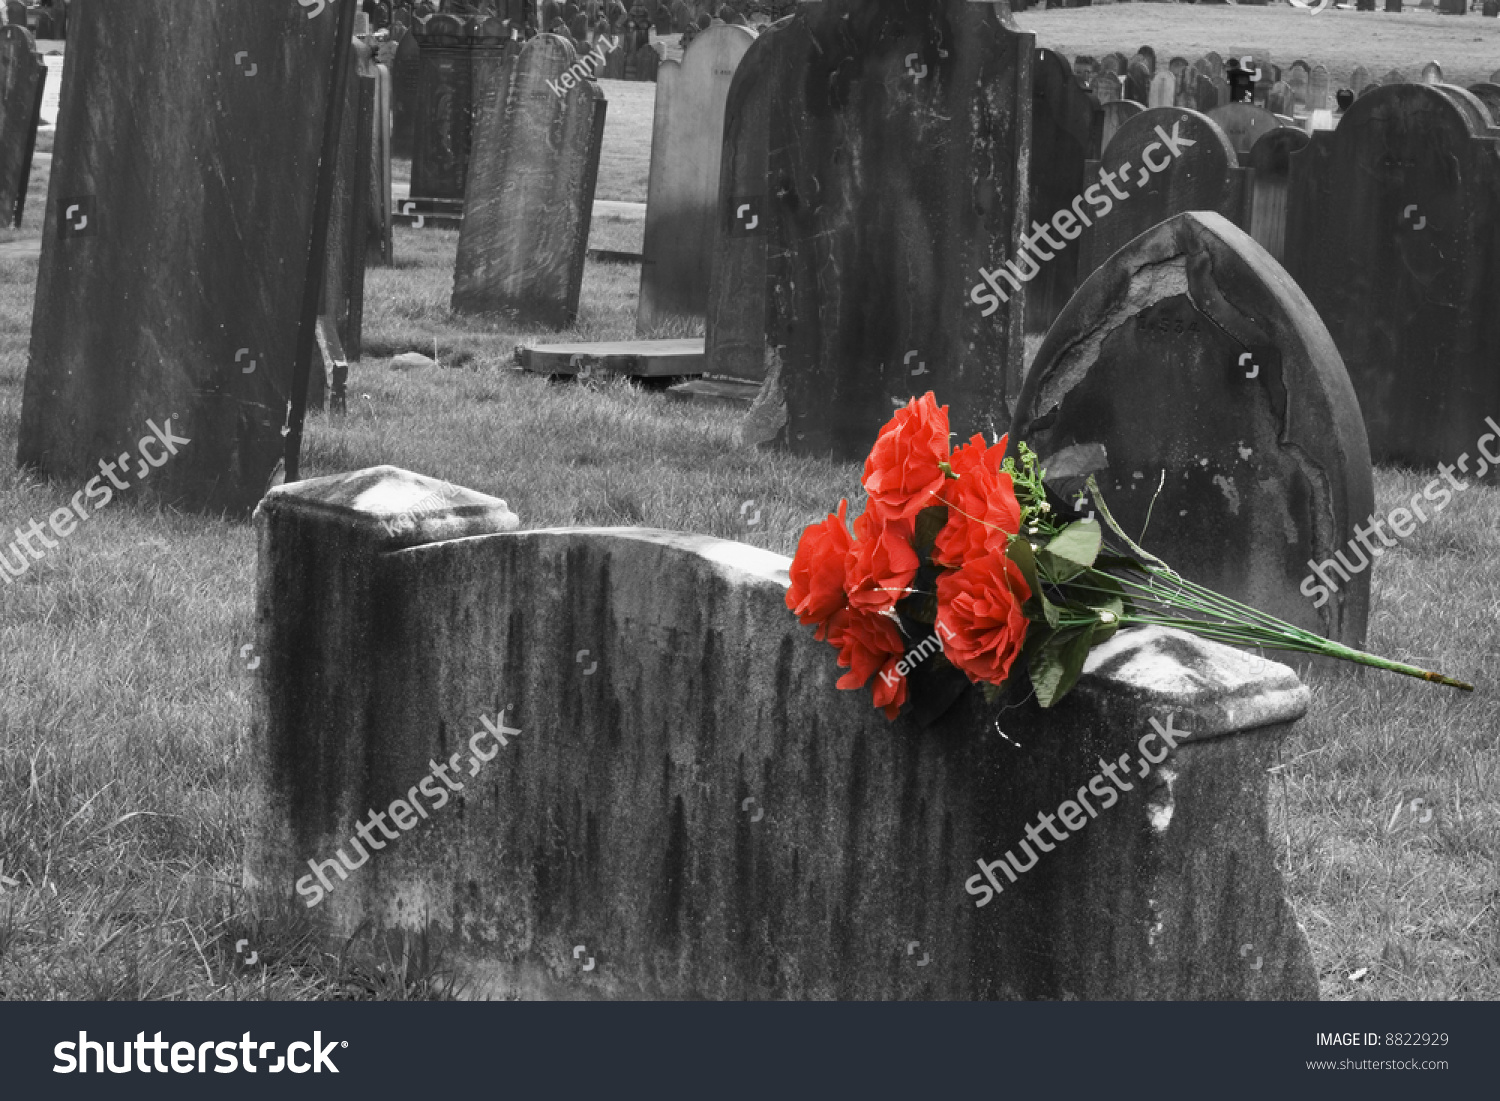 Blank Headstone In Graveyard With Bunch Of Red Roses Stock Photo ...